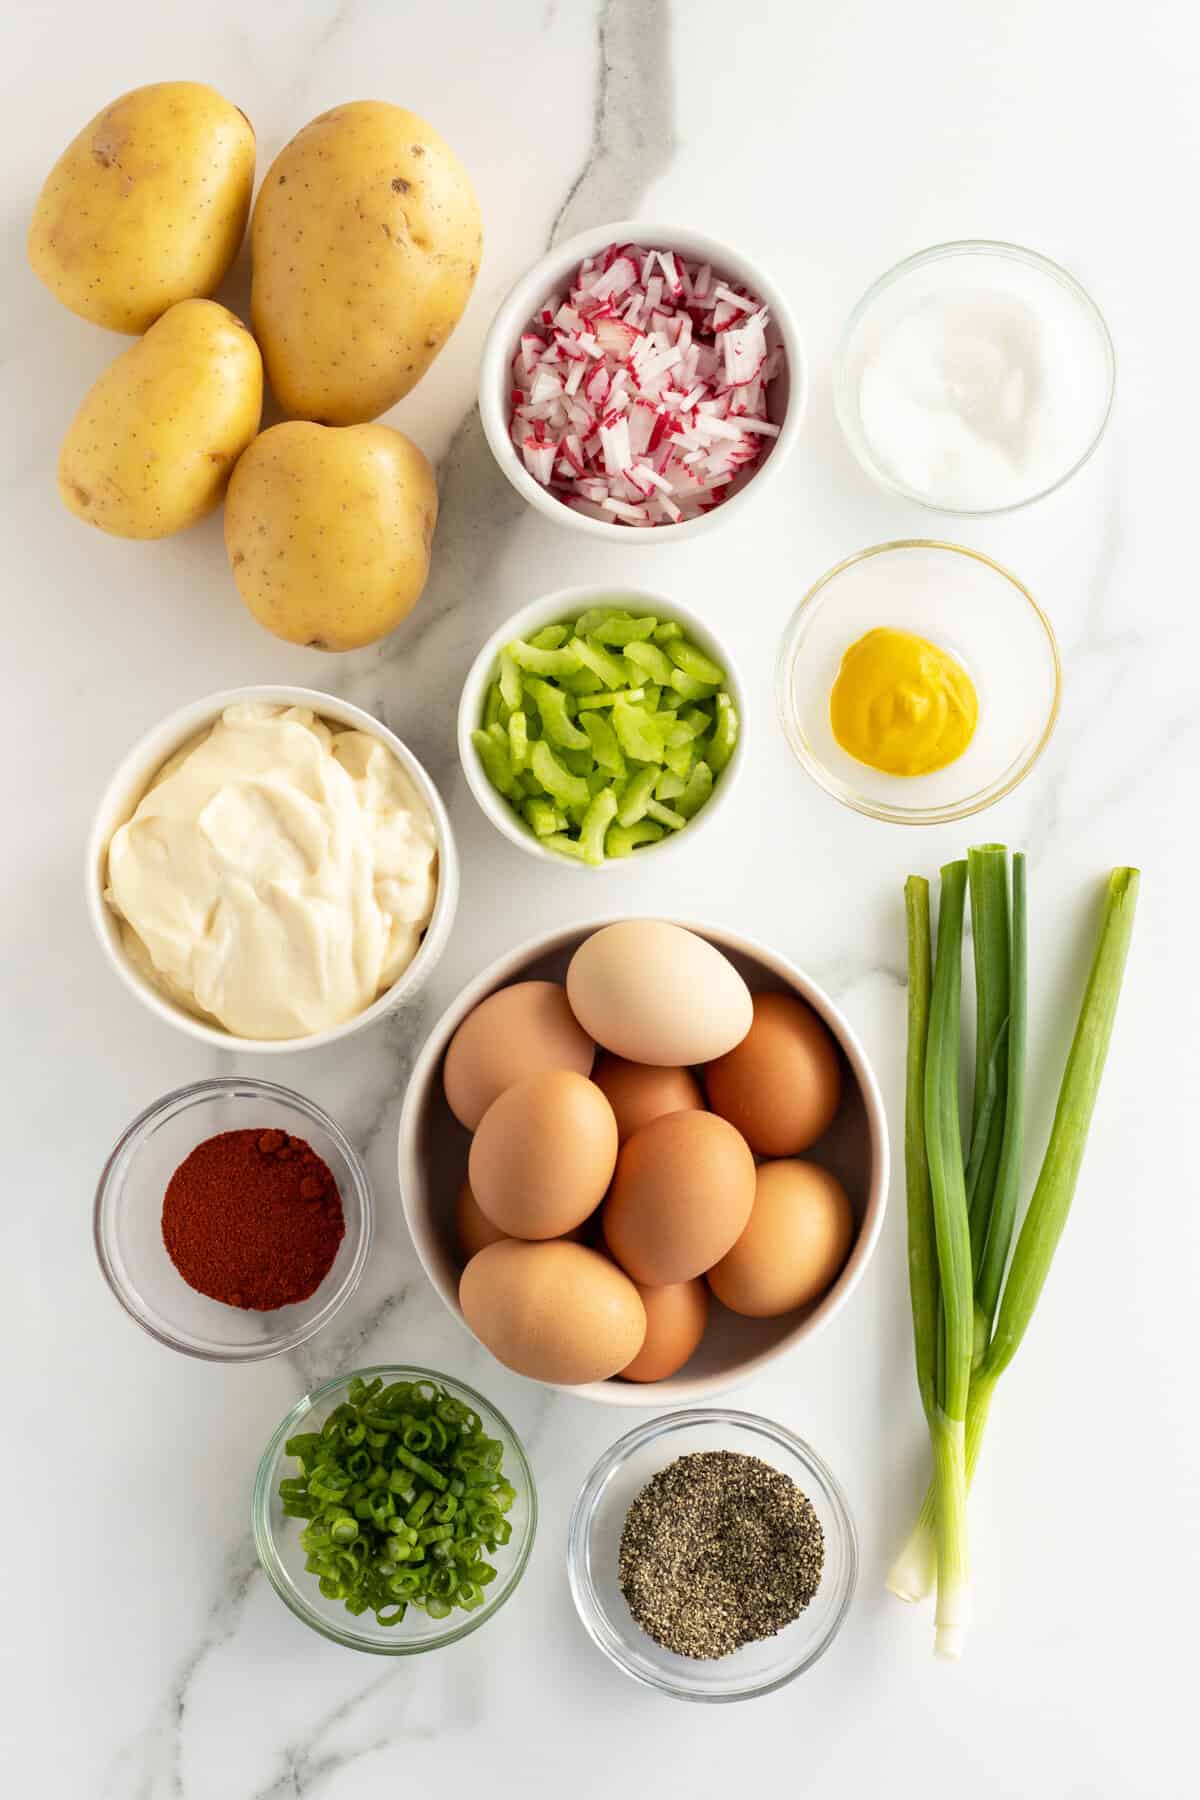 mom's potato salad ingredients in small white and clear bowls